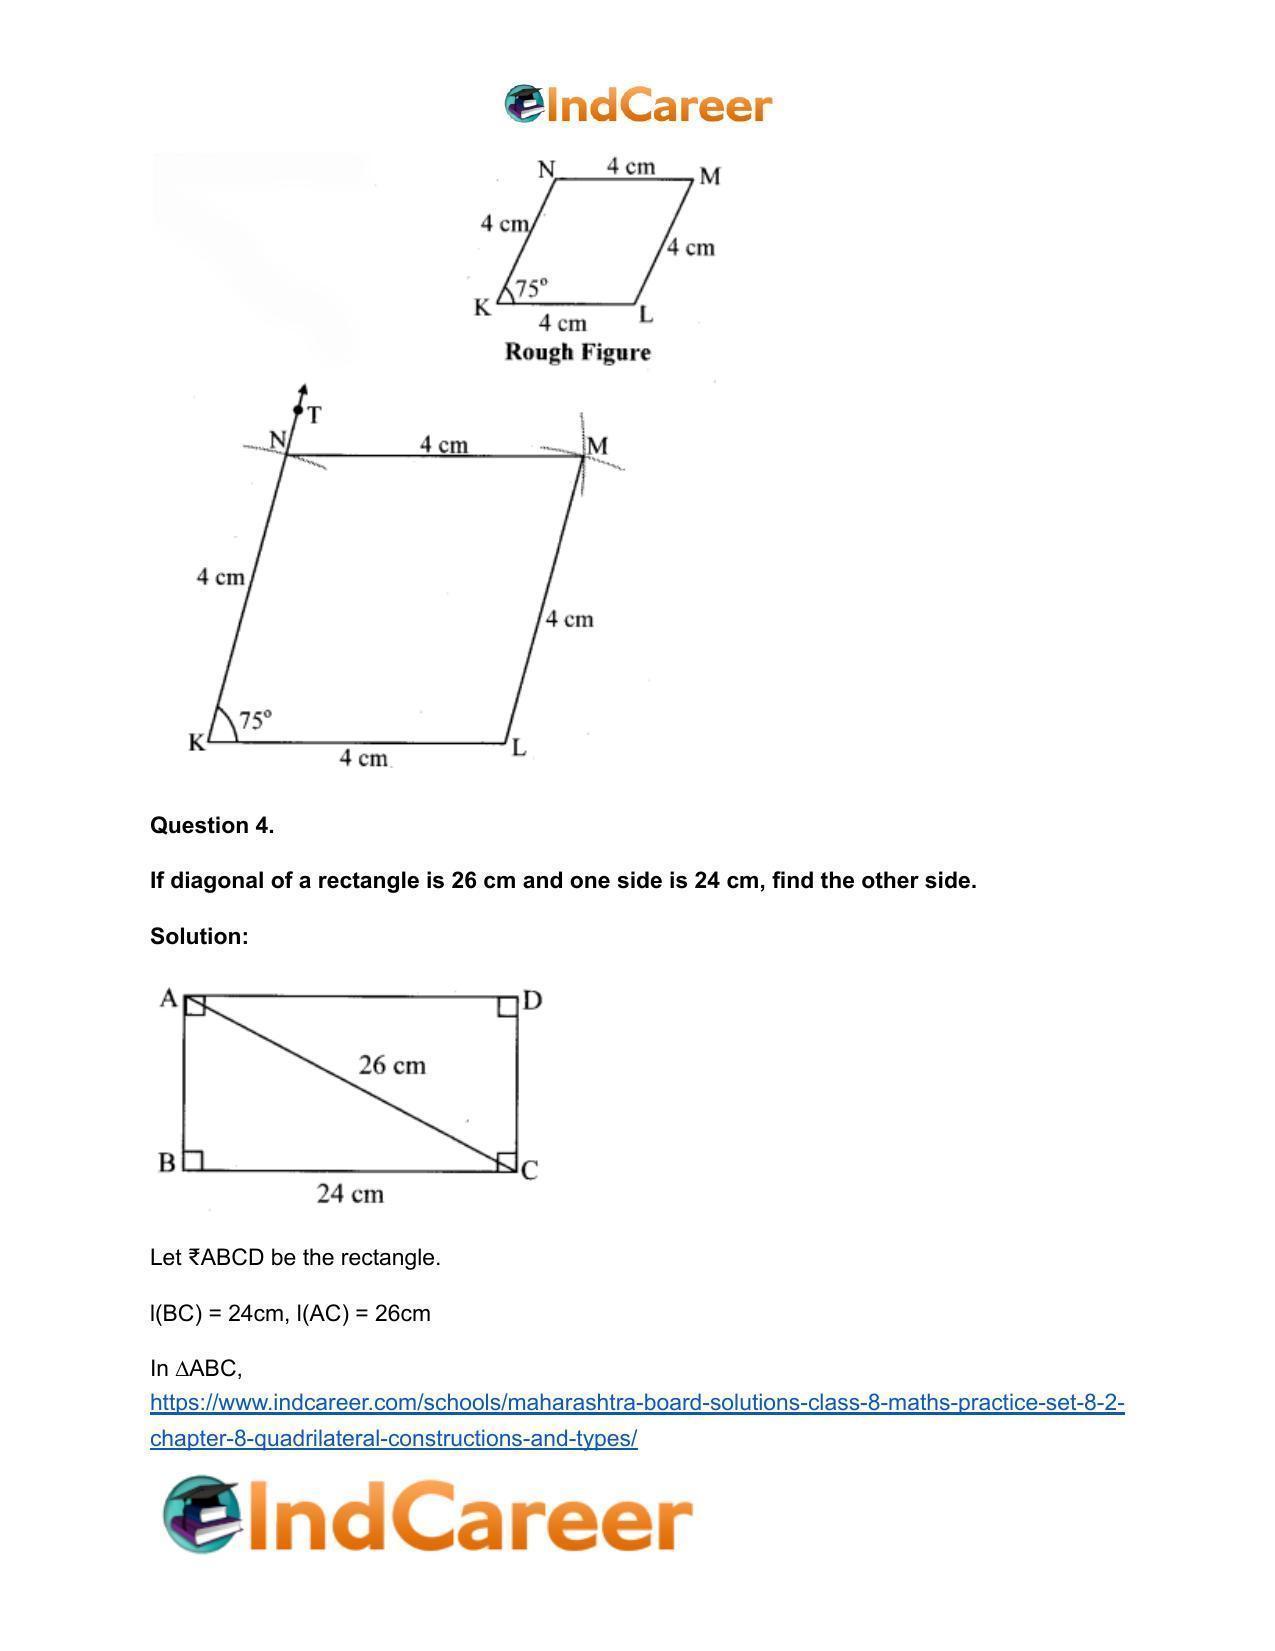 Maharashtra Board Solutions Class 8-Maths (Practice Set 8.2): Chapter 8- Quadrilateral: Constructions and Types - Page 5